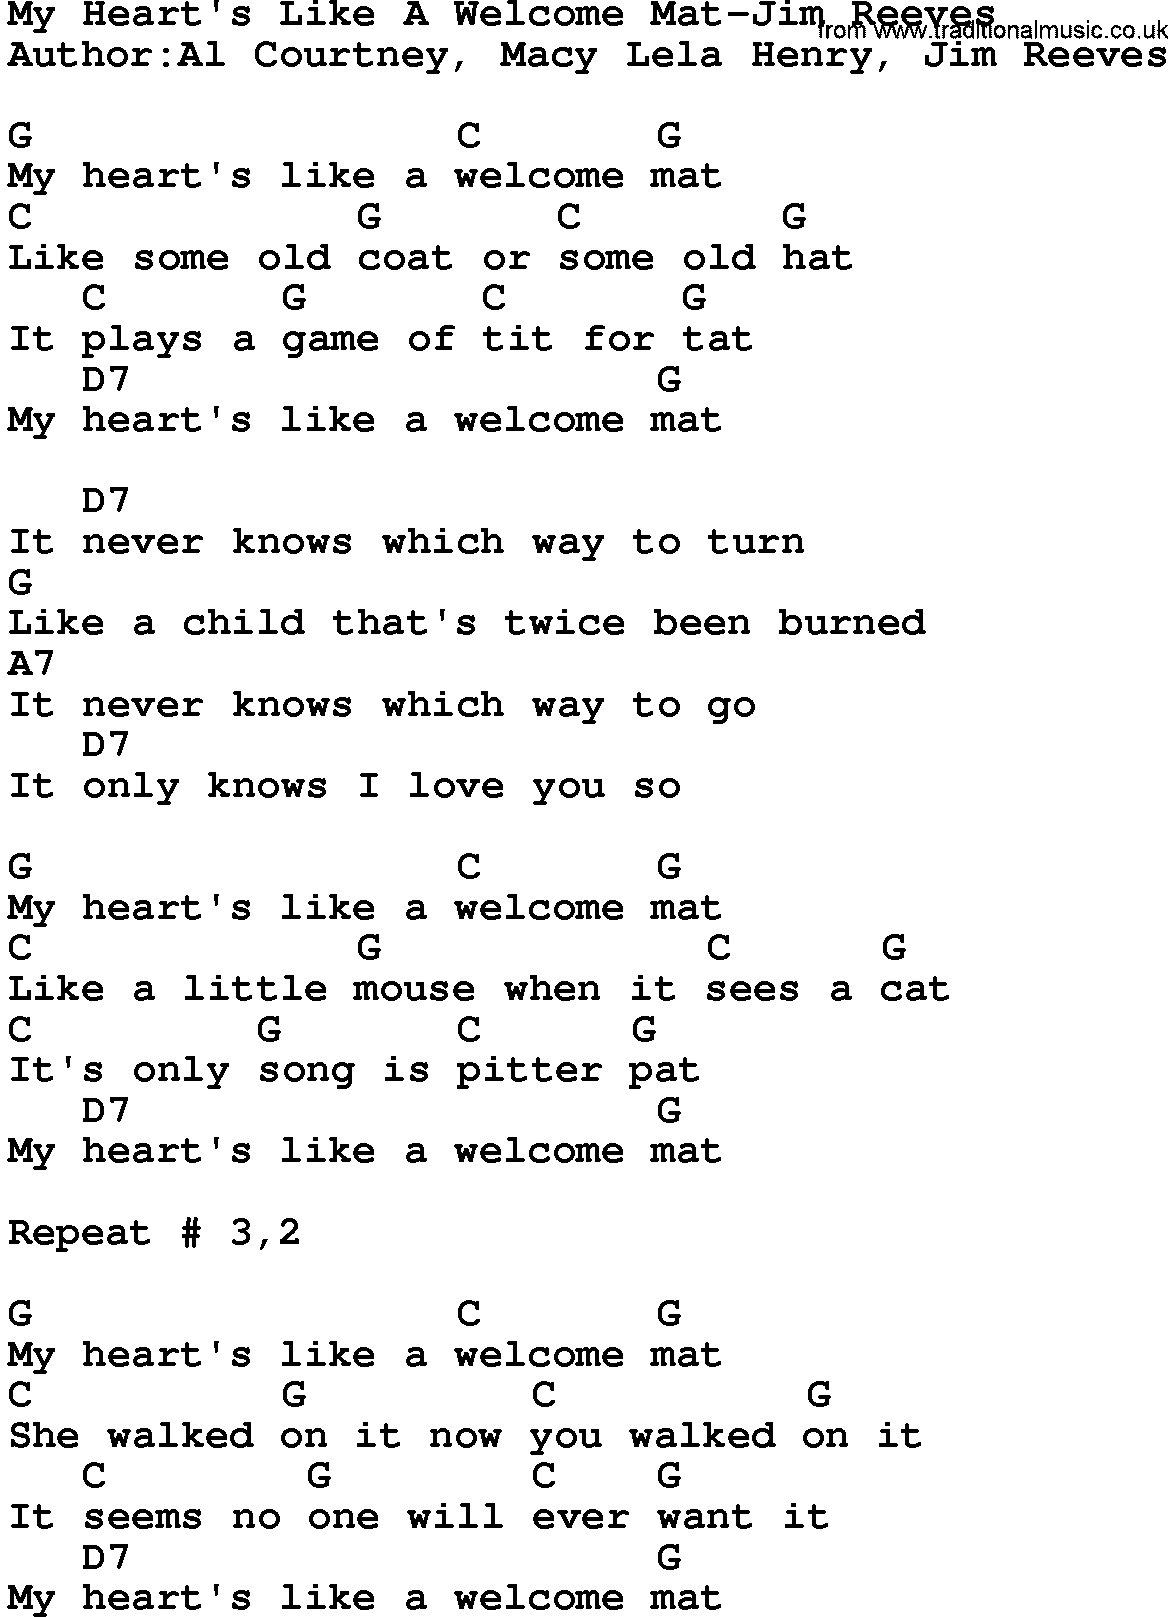 Country music song: My Heart's Like A Welcome Mat-Jim Reeves lyrics and chords